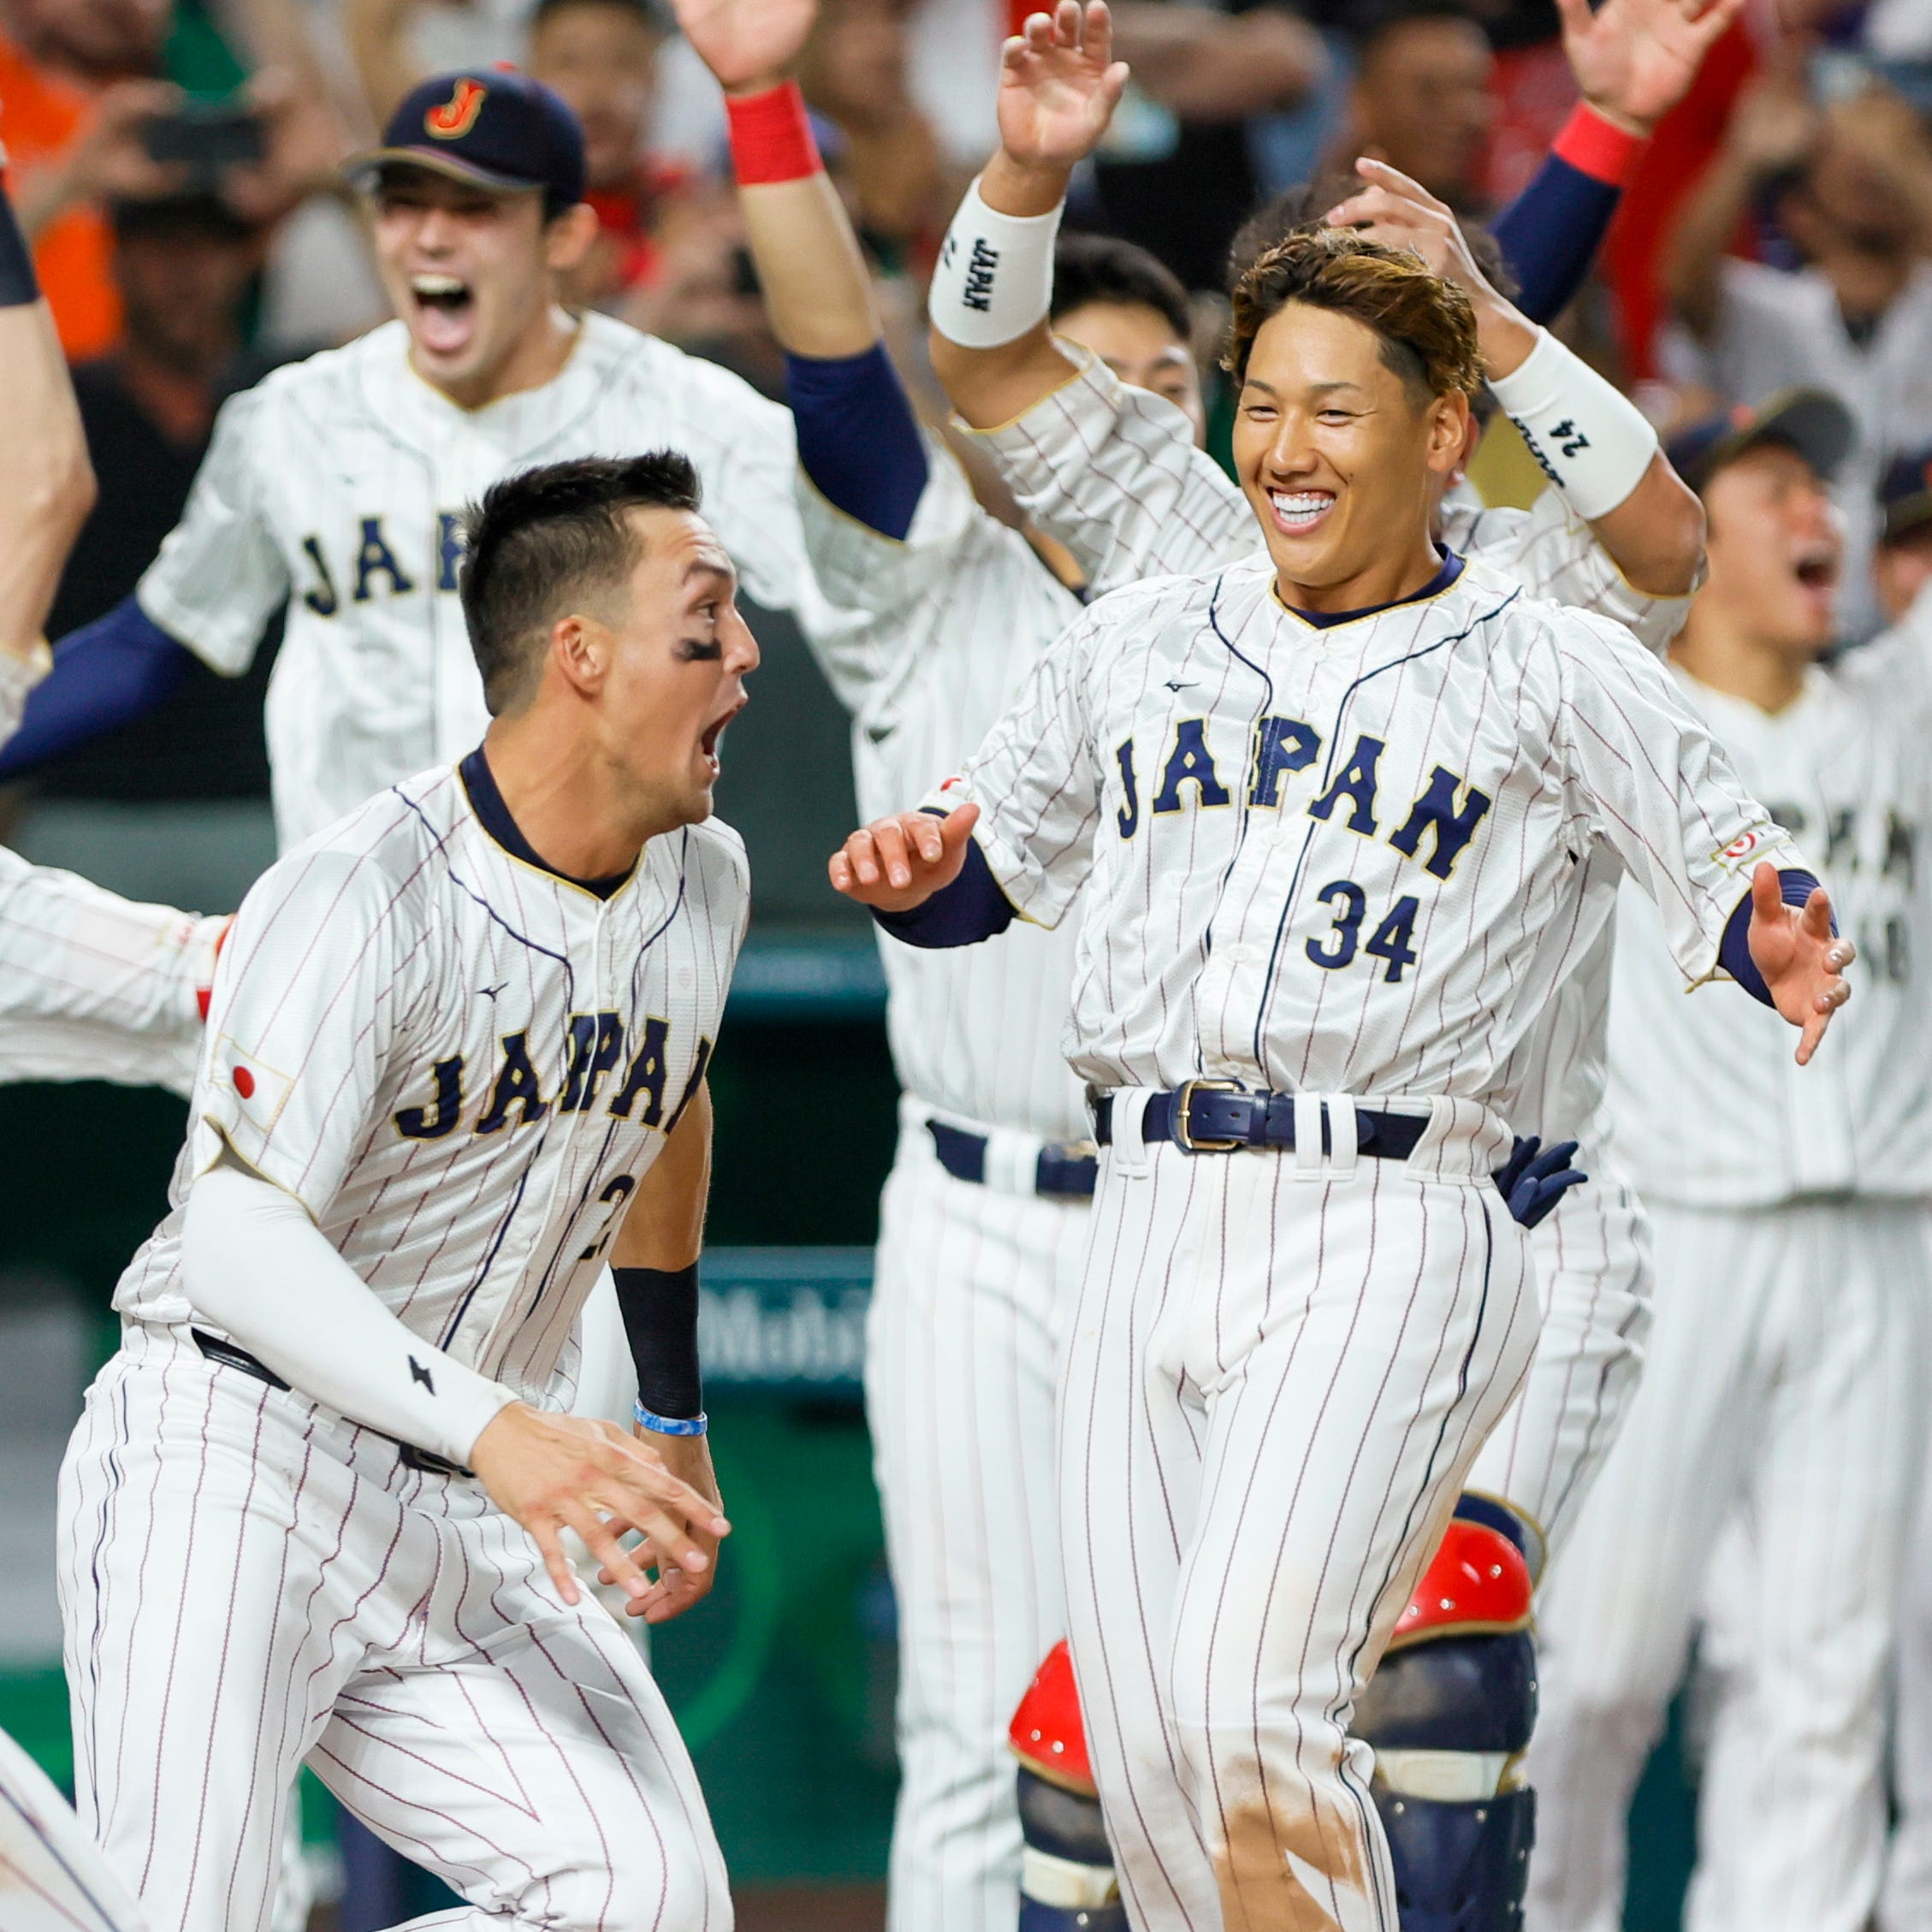 Japan players celebrate after winning the World Baseball semifinal game against Mexico at LoanDepot Park.